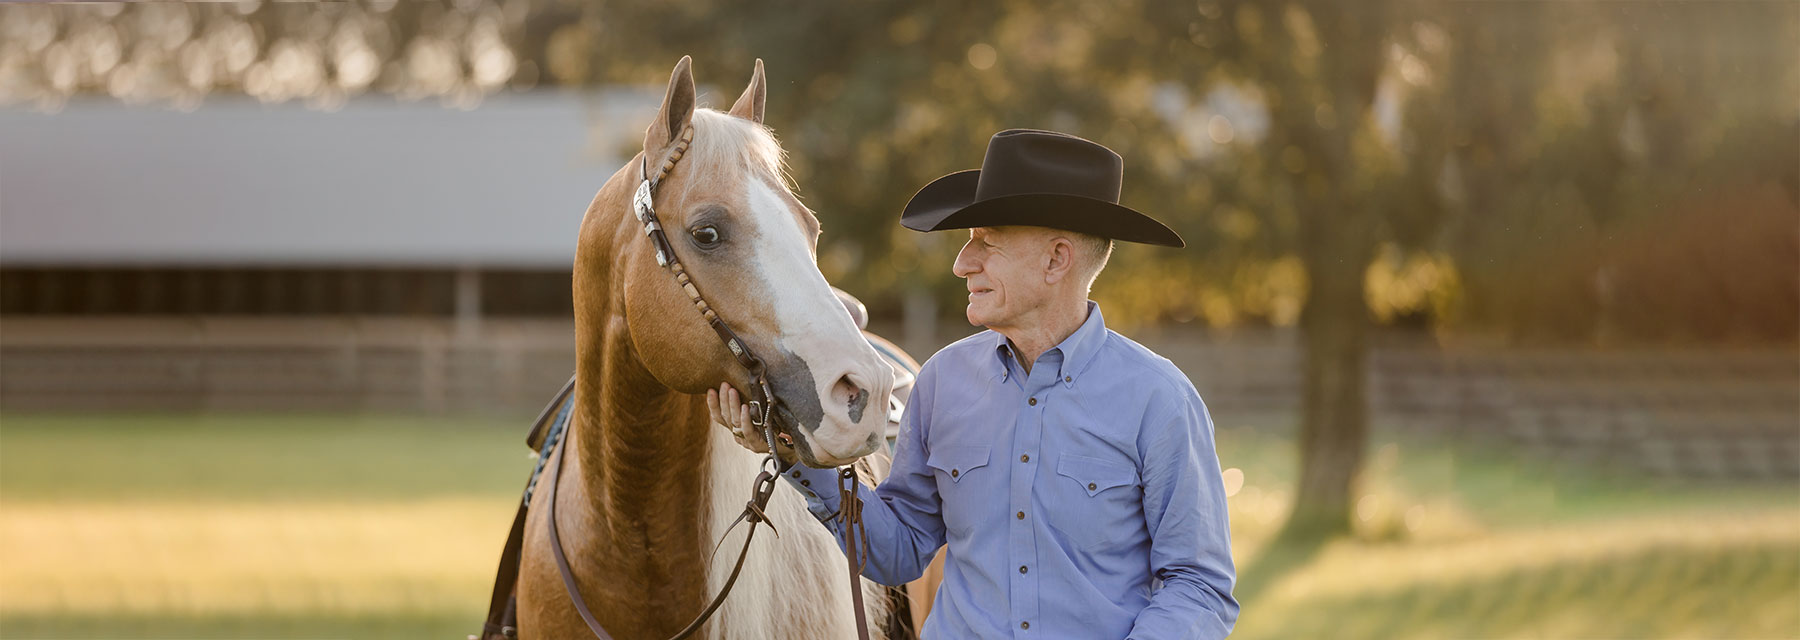 Lyle Lovett with horse